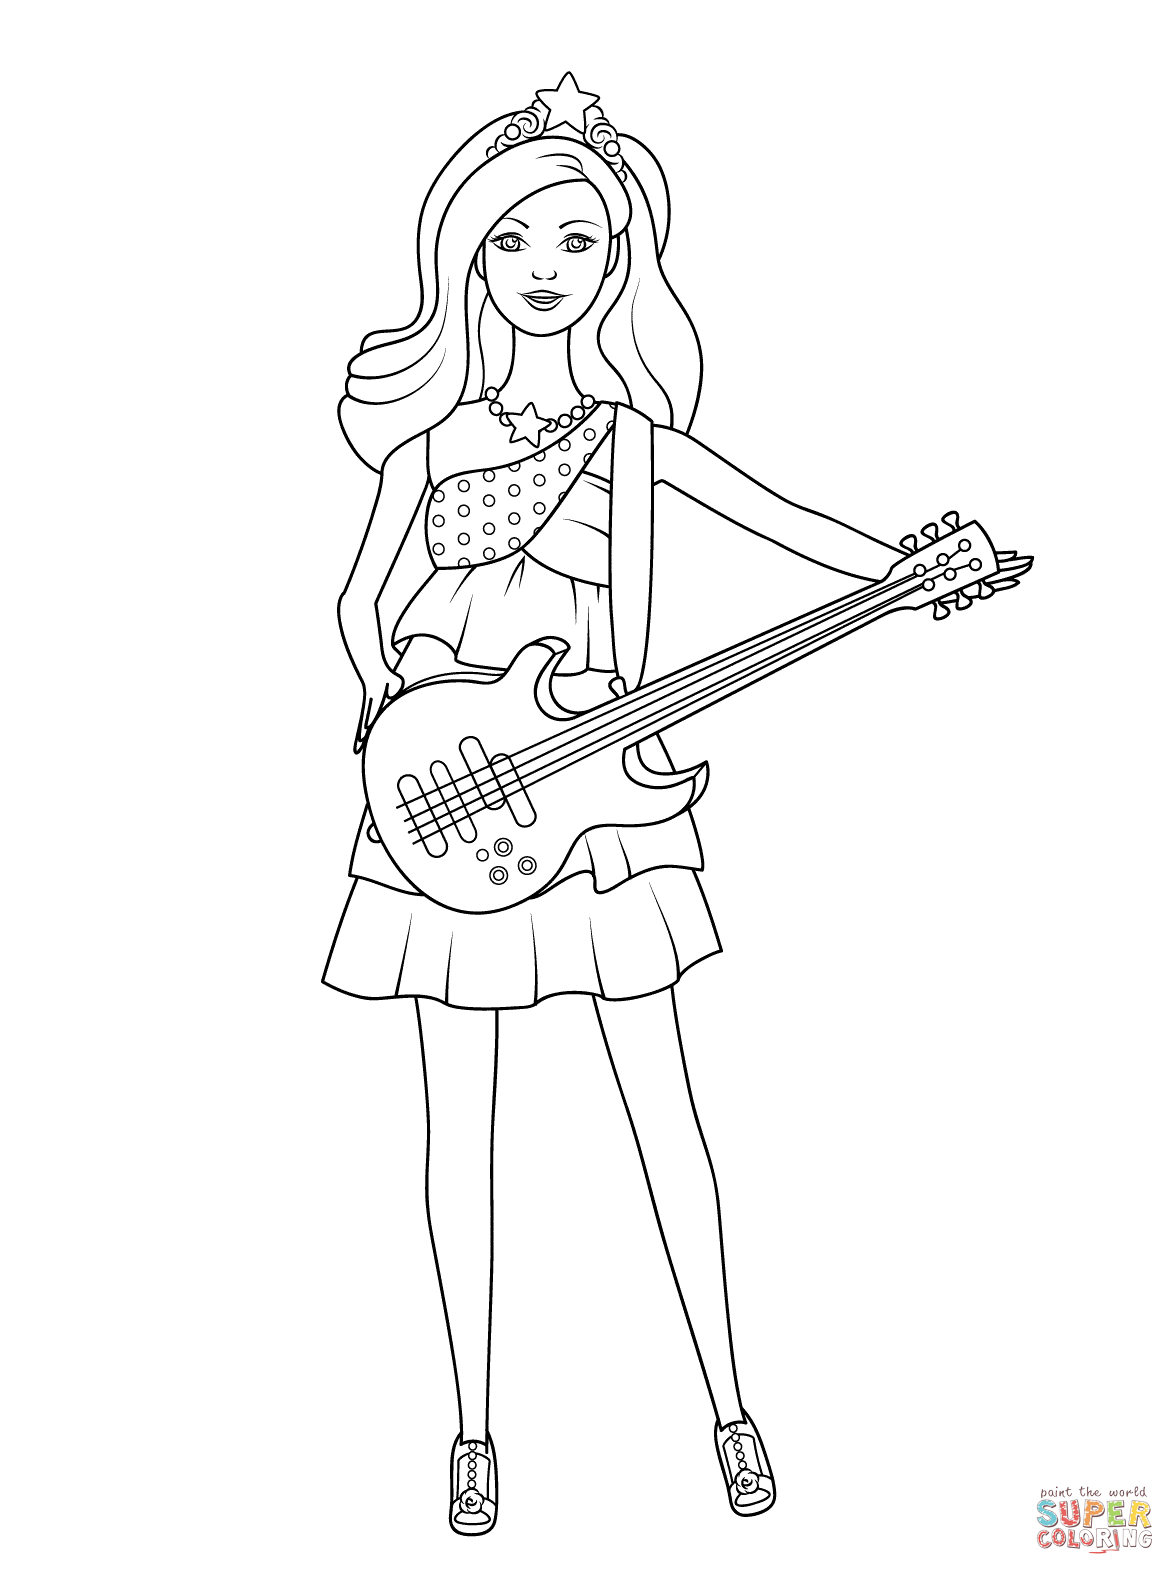 Barbie pop star keira coloring page free printable coloring pages